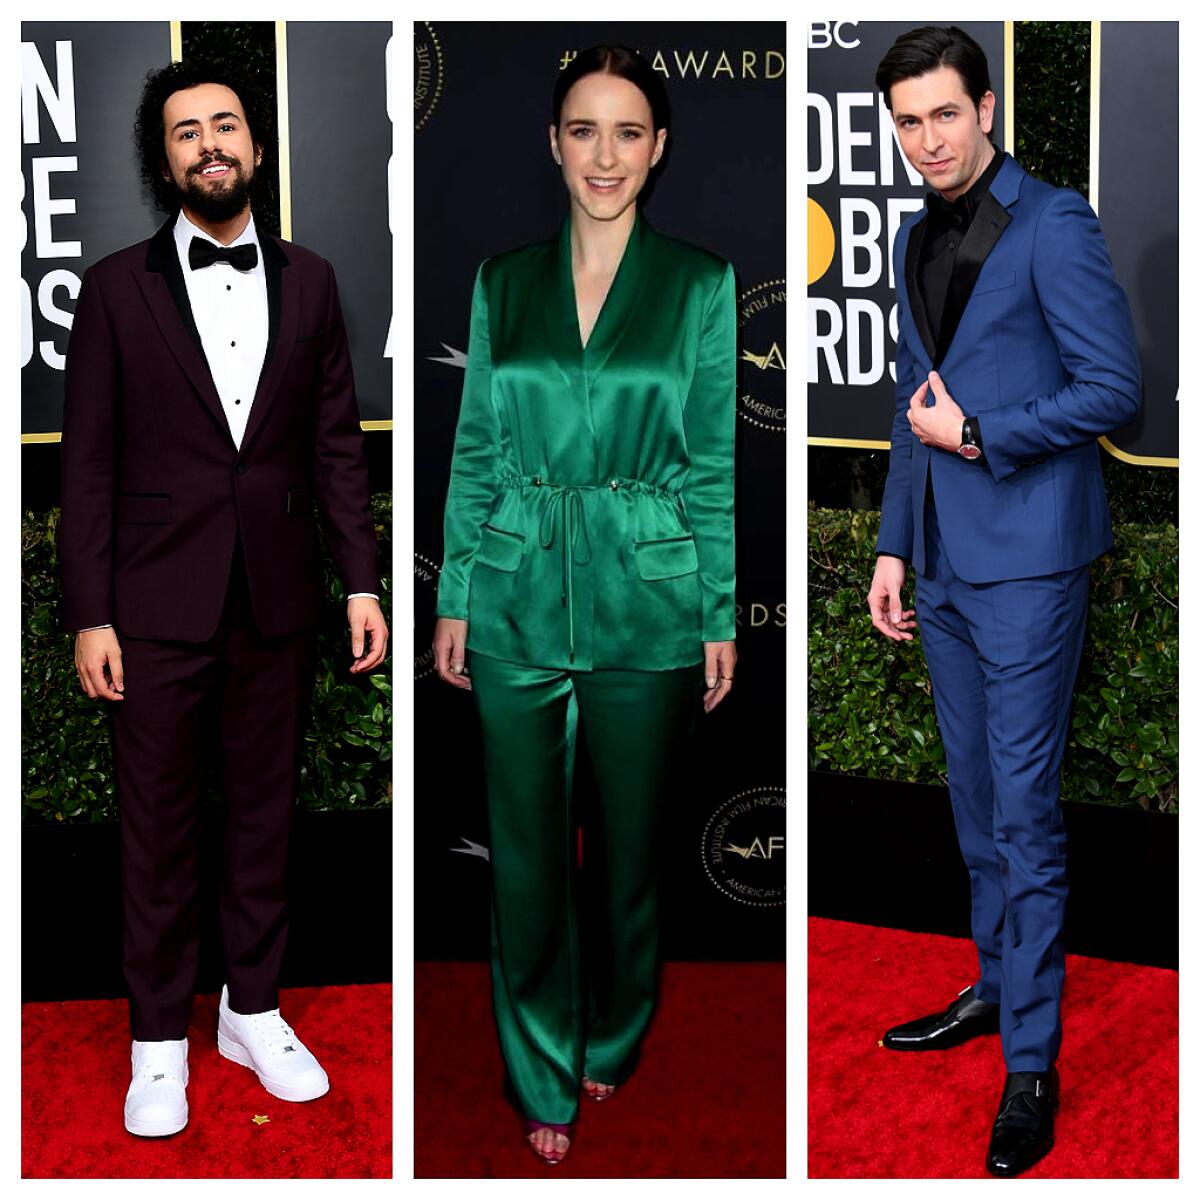 Photos of Emmy nominees Ramy Youssef, from left, Rachel Brosnahan and Nicholas Braun.